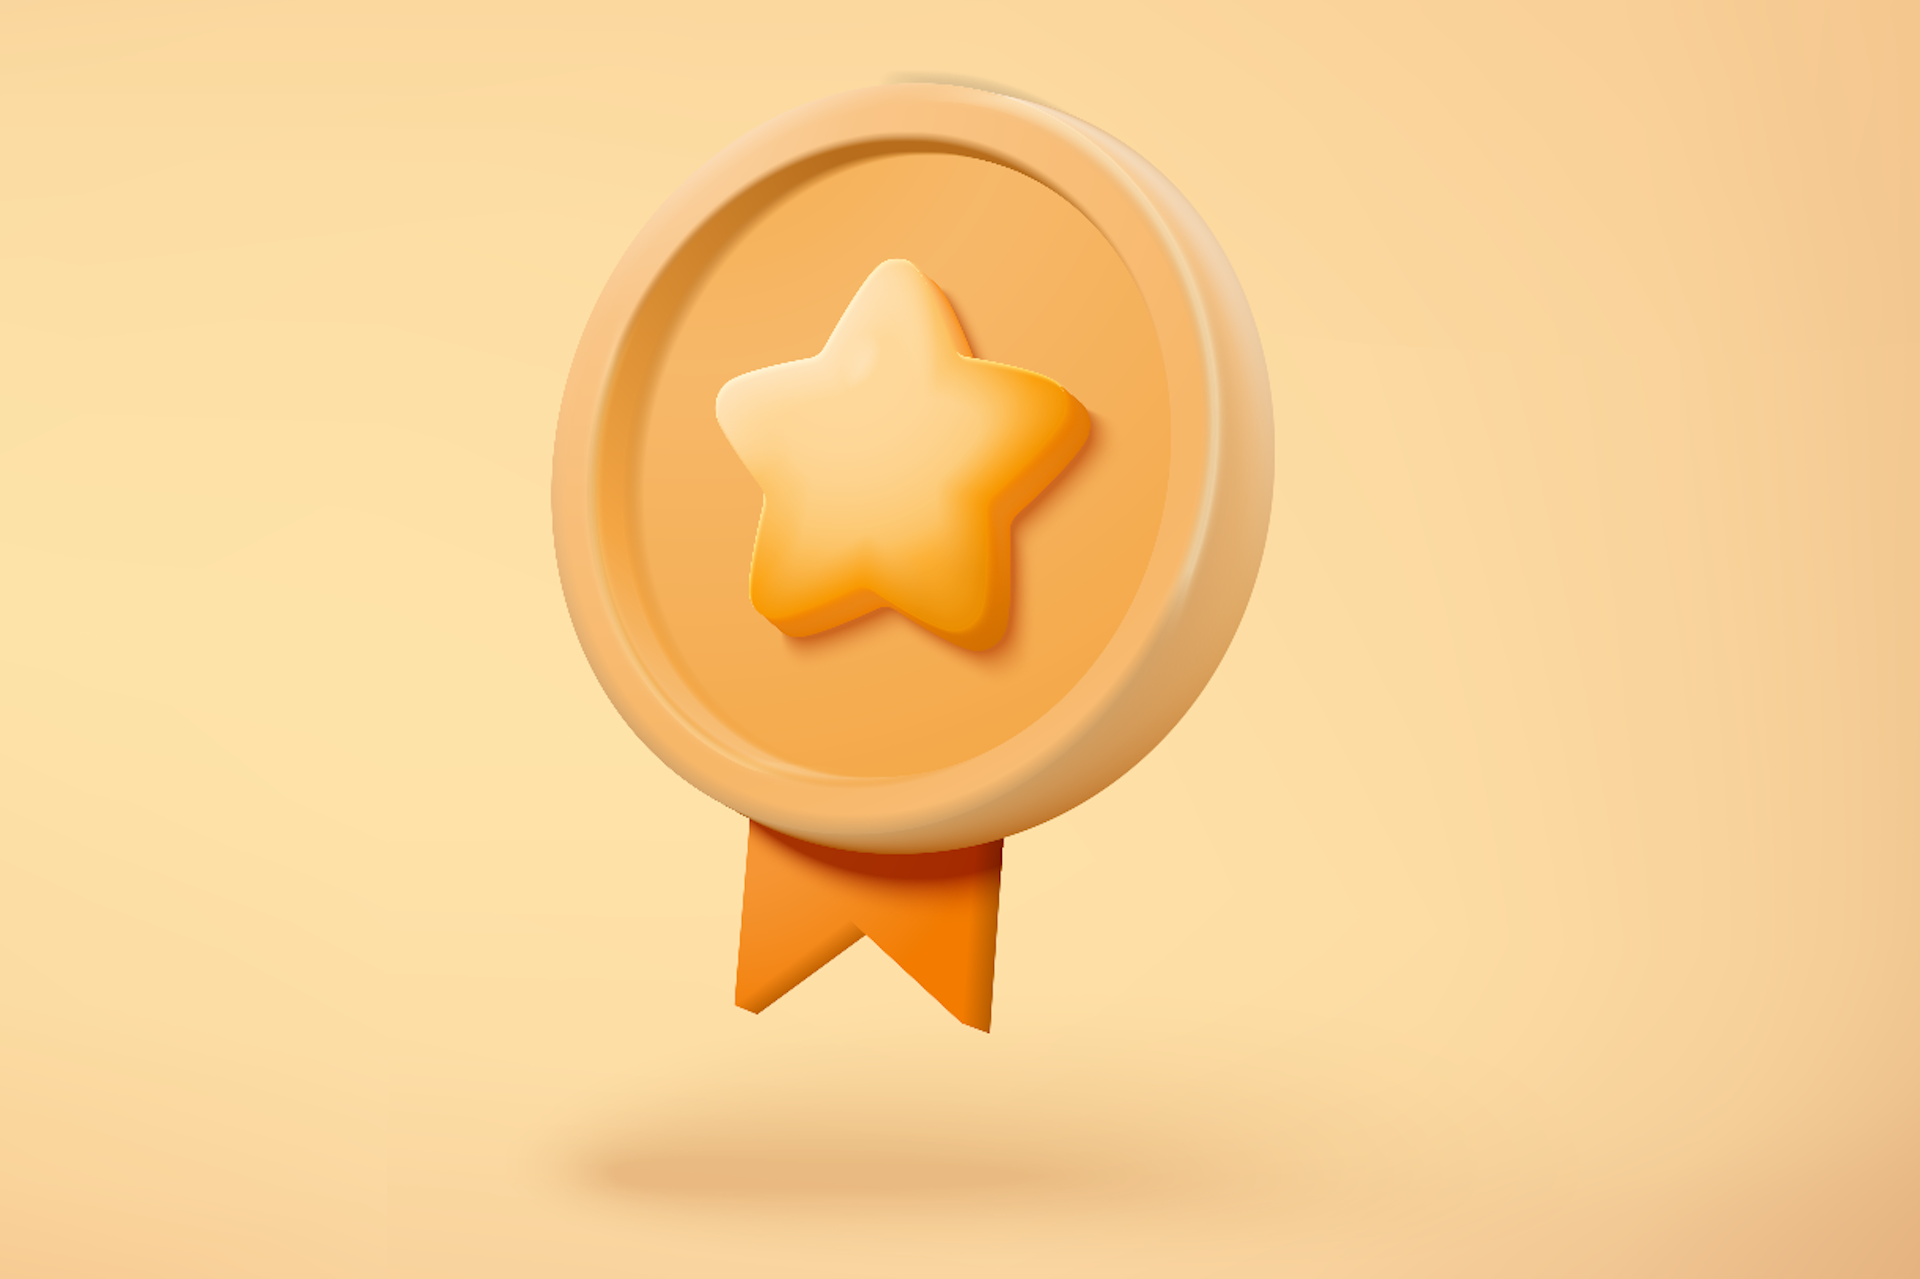 Image showing a large yellow star in the middle of a gold medal, on a light gold background. Blog post for the best 13 influencer marketing tools.